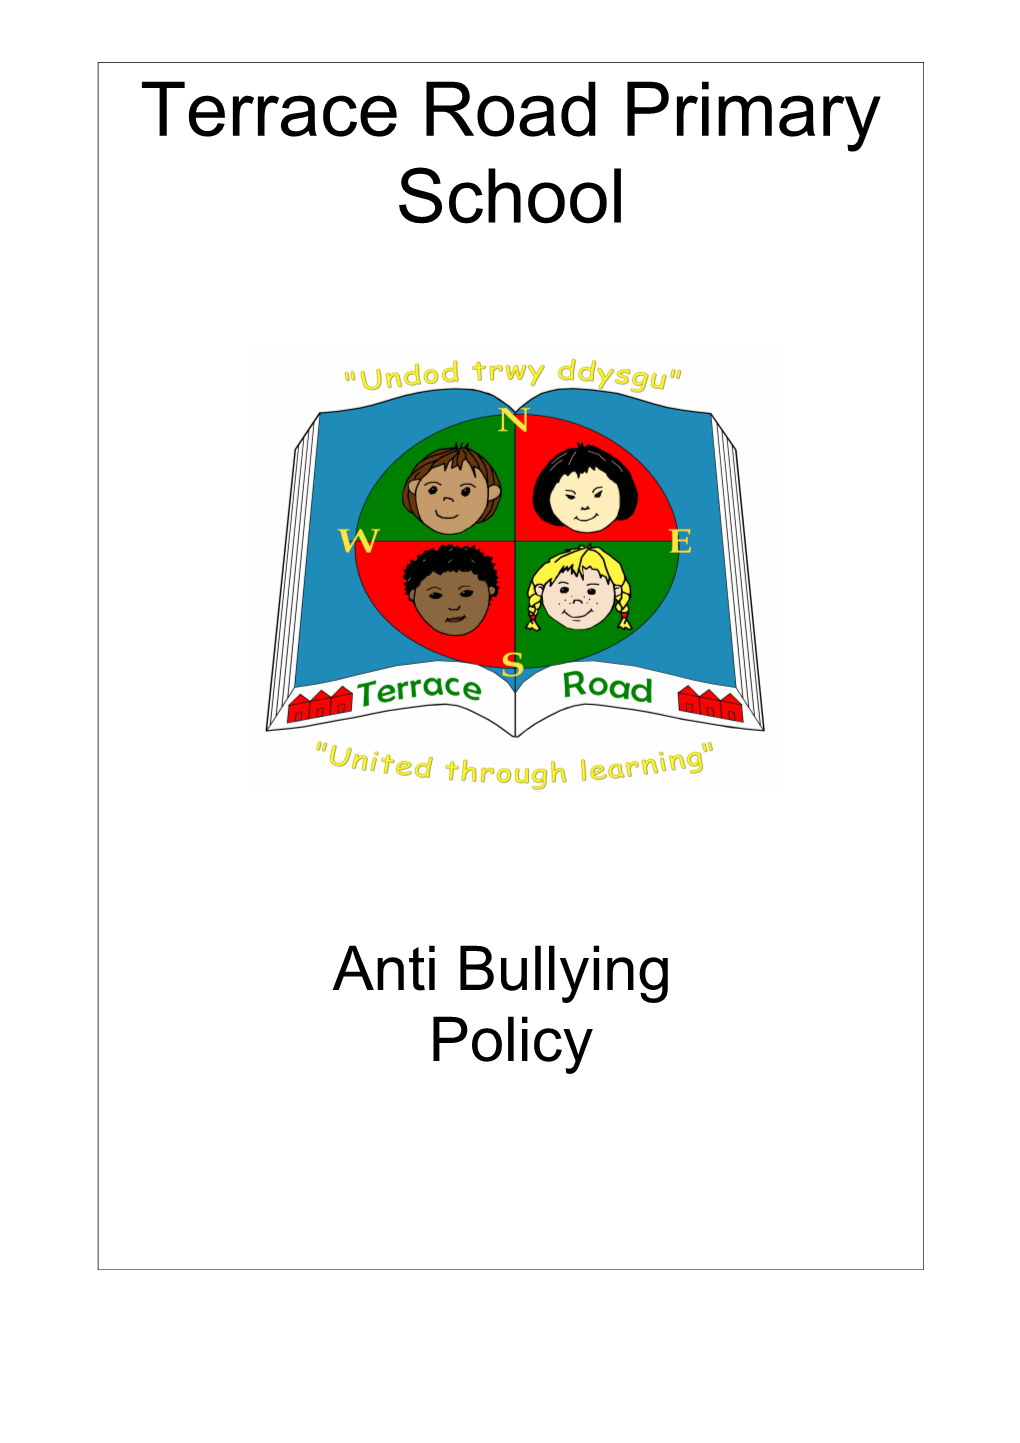 Policy for Dealing with Bullying